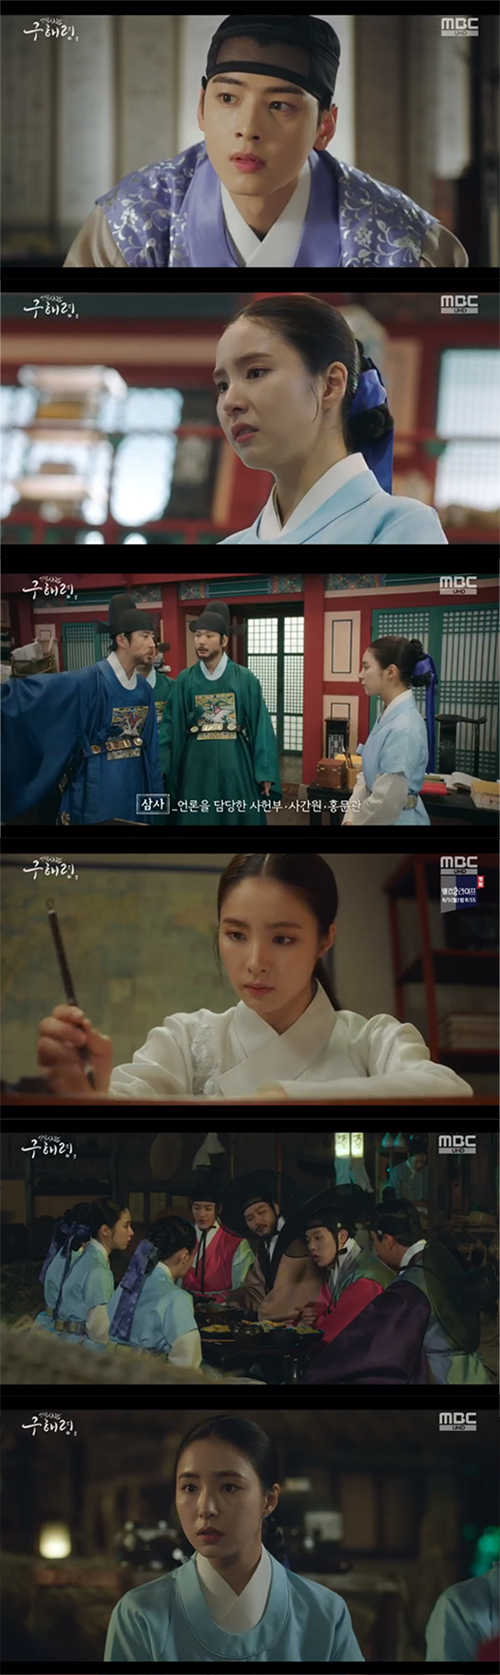 Na Hae-ryung, said Jung Eun-woo, who comforted Shin Se-kyung.On MBCWednesday-Thursday evening drama drama Na Hae-ryung, which was broadcast on the afternoon of the 31st, Na Hae-ryung (Shin Se-kyung) was shown meeting Lee Rim (Jung Eun-woo) as a cadet.On this day, Irim was informed that Ada Lovelace would come. Irim should not deceive the officer, even if he does not deceive the eunja, said Huh Sam-bo (Seongjiru) to hide his body.Just stop by, he said.Lee Rim hastily repatriated. At this point, Koo Na Hae-ryung came in to say hello, and Lee Rim introduced himself as Dowon Daegun Lee Rim.I wished I hadnt, said Gu Na Hae-ryung, in a small voice.Na Hae-ryung told Lee, I have had a lot of opportunities in the meantime, but now what do you want to say?Or do you have something you want to hear from me, I am sorry that I did not know it was a great army, he said sharply.Lee said, I wanted to say thank you.I do not know why you were there last night, but I wanted to thank you for saving me.  This time I lied to you, so I do not have to apologize. I thought maybe I could be friends, said Koo, and I wished I had one of them who could be on the side of this great palace.Why did not you say it before? The next day, Irim expected to meet Na Hae-ryung when Ada Lovelace came.But Oh Eun-im (Lee Ye-rim) came instead, and Koo Na Hae-ryung went to Lee Jin (Park Ki-woong). Lee-rim was disappointed.Lee Jin asked the former Na Hae-ryung, How was the dream and meeting? The former Na Hae-ryung reported, You just read the books.Lee Jin said, It is difficult to get close to people. Do not understand Ada Lovelace even if it makes you uncomfortable.Lee Jin told Koo that he would go for a bow, and there was a win, too; Lee Jin aimed at the target, while Lee Lim put the bow on the wrong ground.When Na Hae-ryung laughed, Irim said, Do you know how difficult it is to shoot a bow? Do not be sneer and do it yourself.Koo Hae-ryung made a sneering gait at the Irim provocation.Later, Na Hae-ryung went to receive a green bar, but was unfairly done; he was late and did not receive a green bar for emptying the warehouse.Na Hae-ryung learned from his fellow officers that this was a mess.Na Hae-ryung wrote an appeal, but the next day he was insulted by his senior officer, who said, What kind of a moron has raised such an appeal?Is the bitch showing up to be outside?Na Hae-ryung shed tears and said, I want to know why I should be angry. I have only appealed to you to solve it because I have seen something wrong and I have been through it.Na Hae-ryung went to see Irim with tears. In a different way, Irim asked carefully, Whats going on?When Koo failed to answer and wept, Irim said, You can cry as much as you like, and no one can hear you even if you cry out loud because you dont come.Meanwhile, MBC Wednesday-Thursday evening drama Na Hae-ryung will be broadcast at 8:55 pm.Photo  MBC Broadcasting Screen